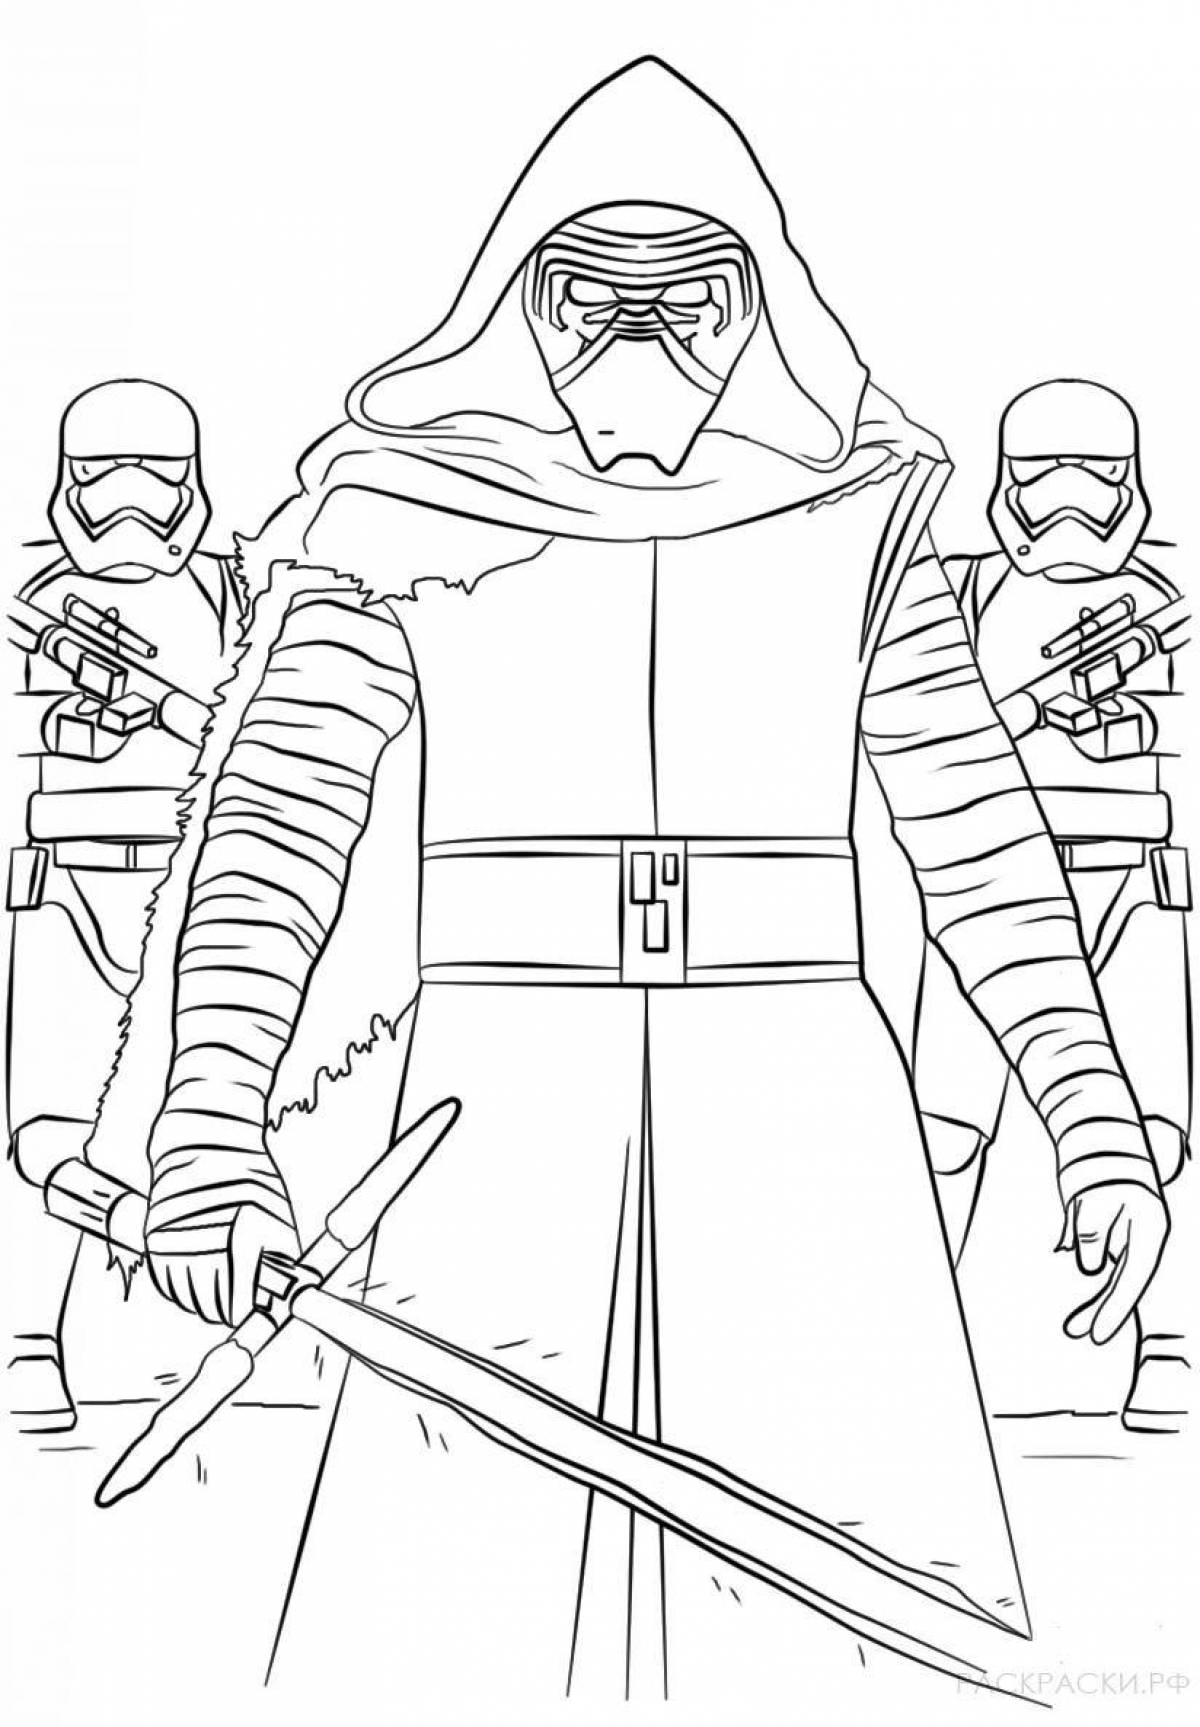 Dazzling star wars coloring book